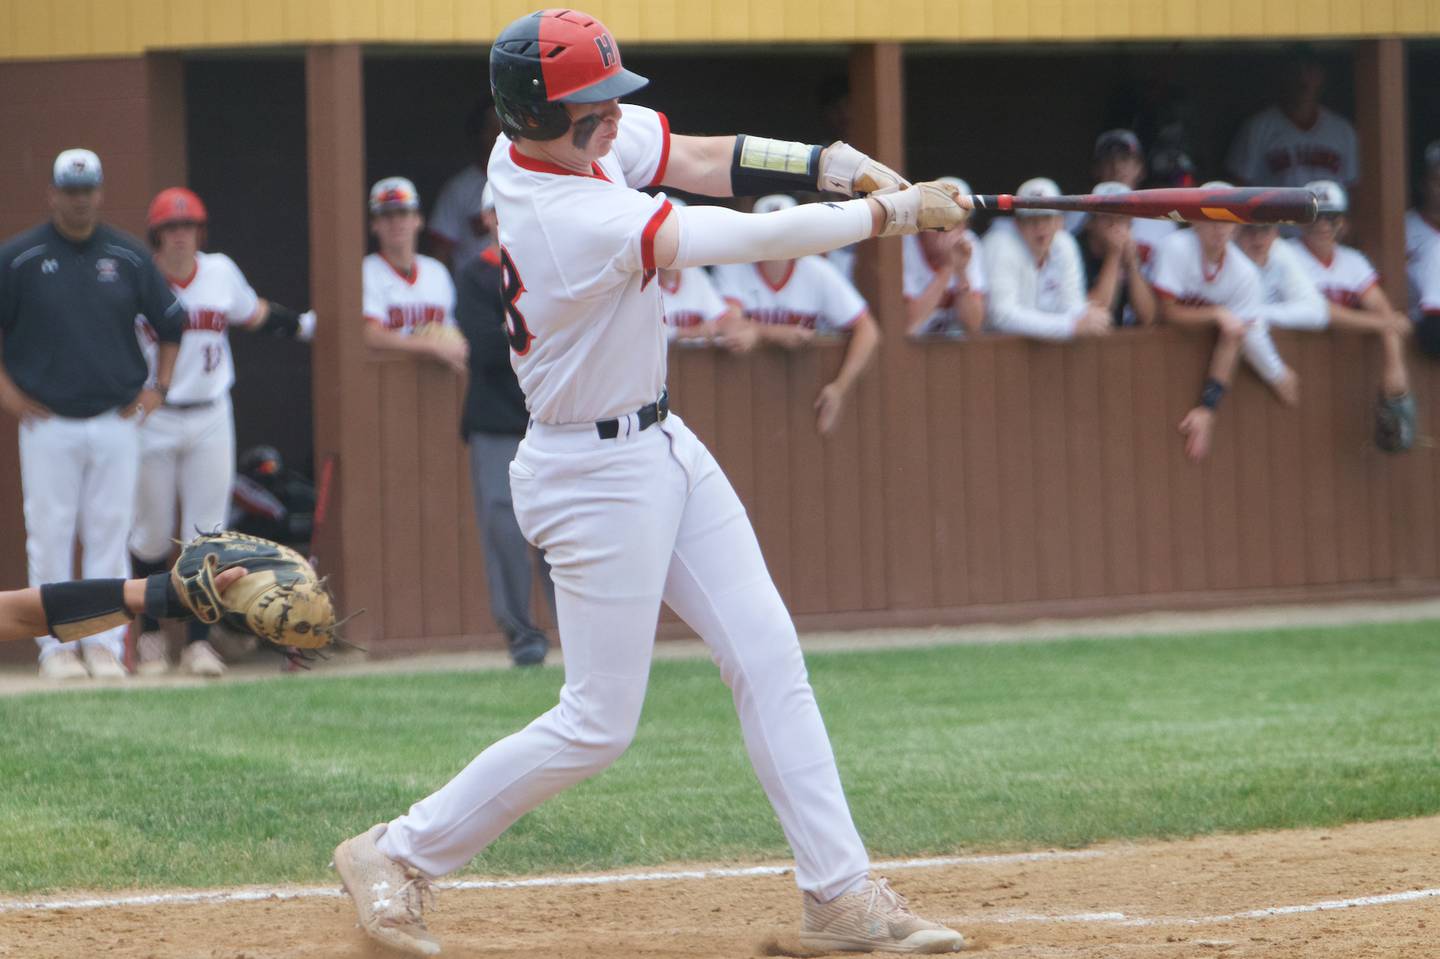 Huntley's A.J. Putty connects for a three-run home run against McHenry at the Class 4A Sectional Final on June 4, 2022 in Algonquin.